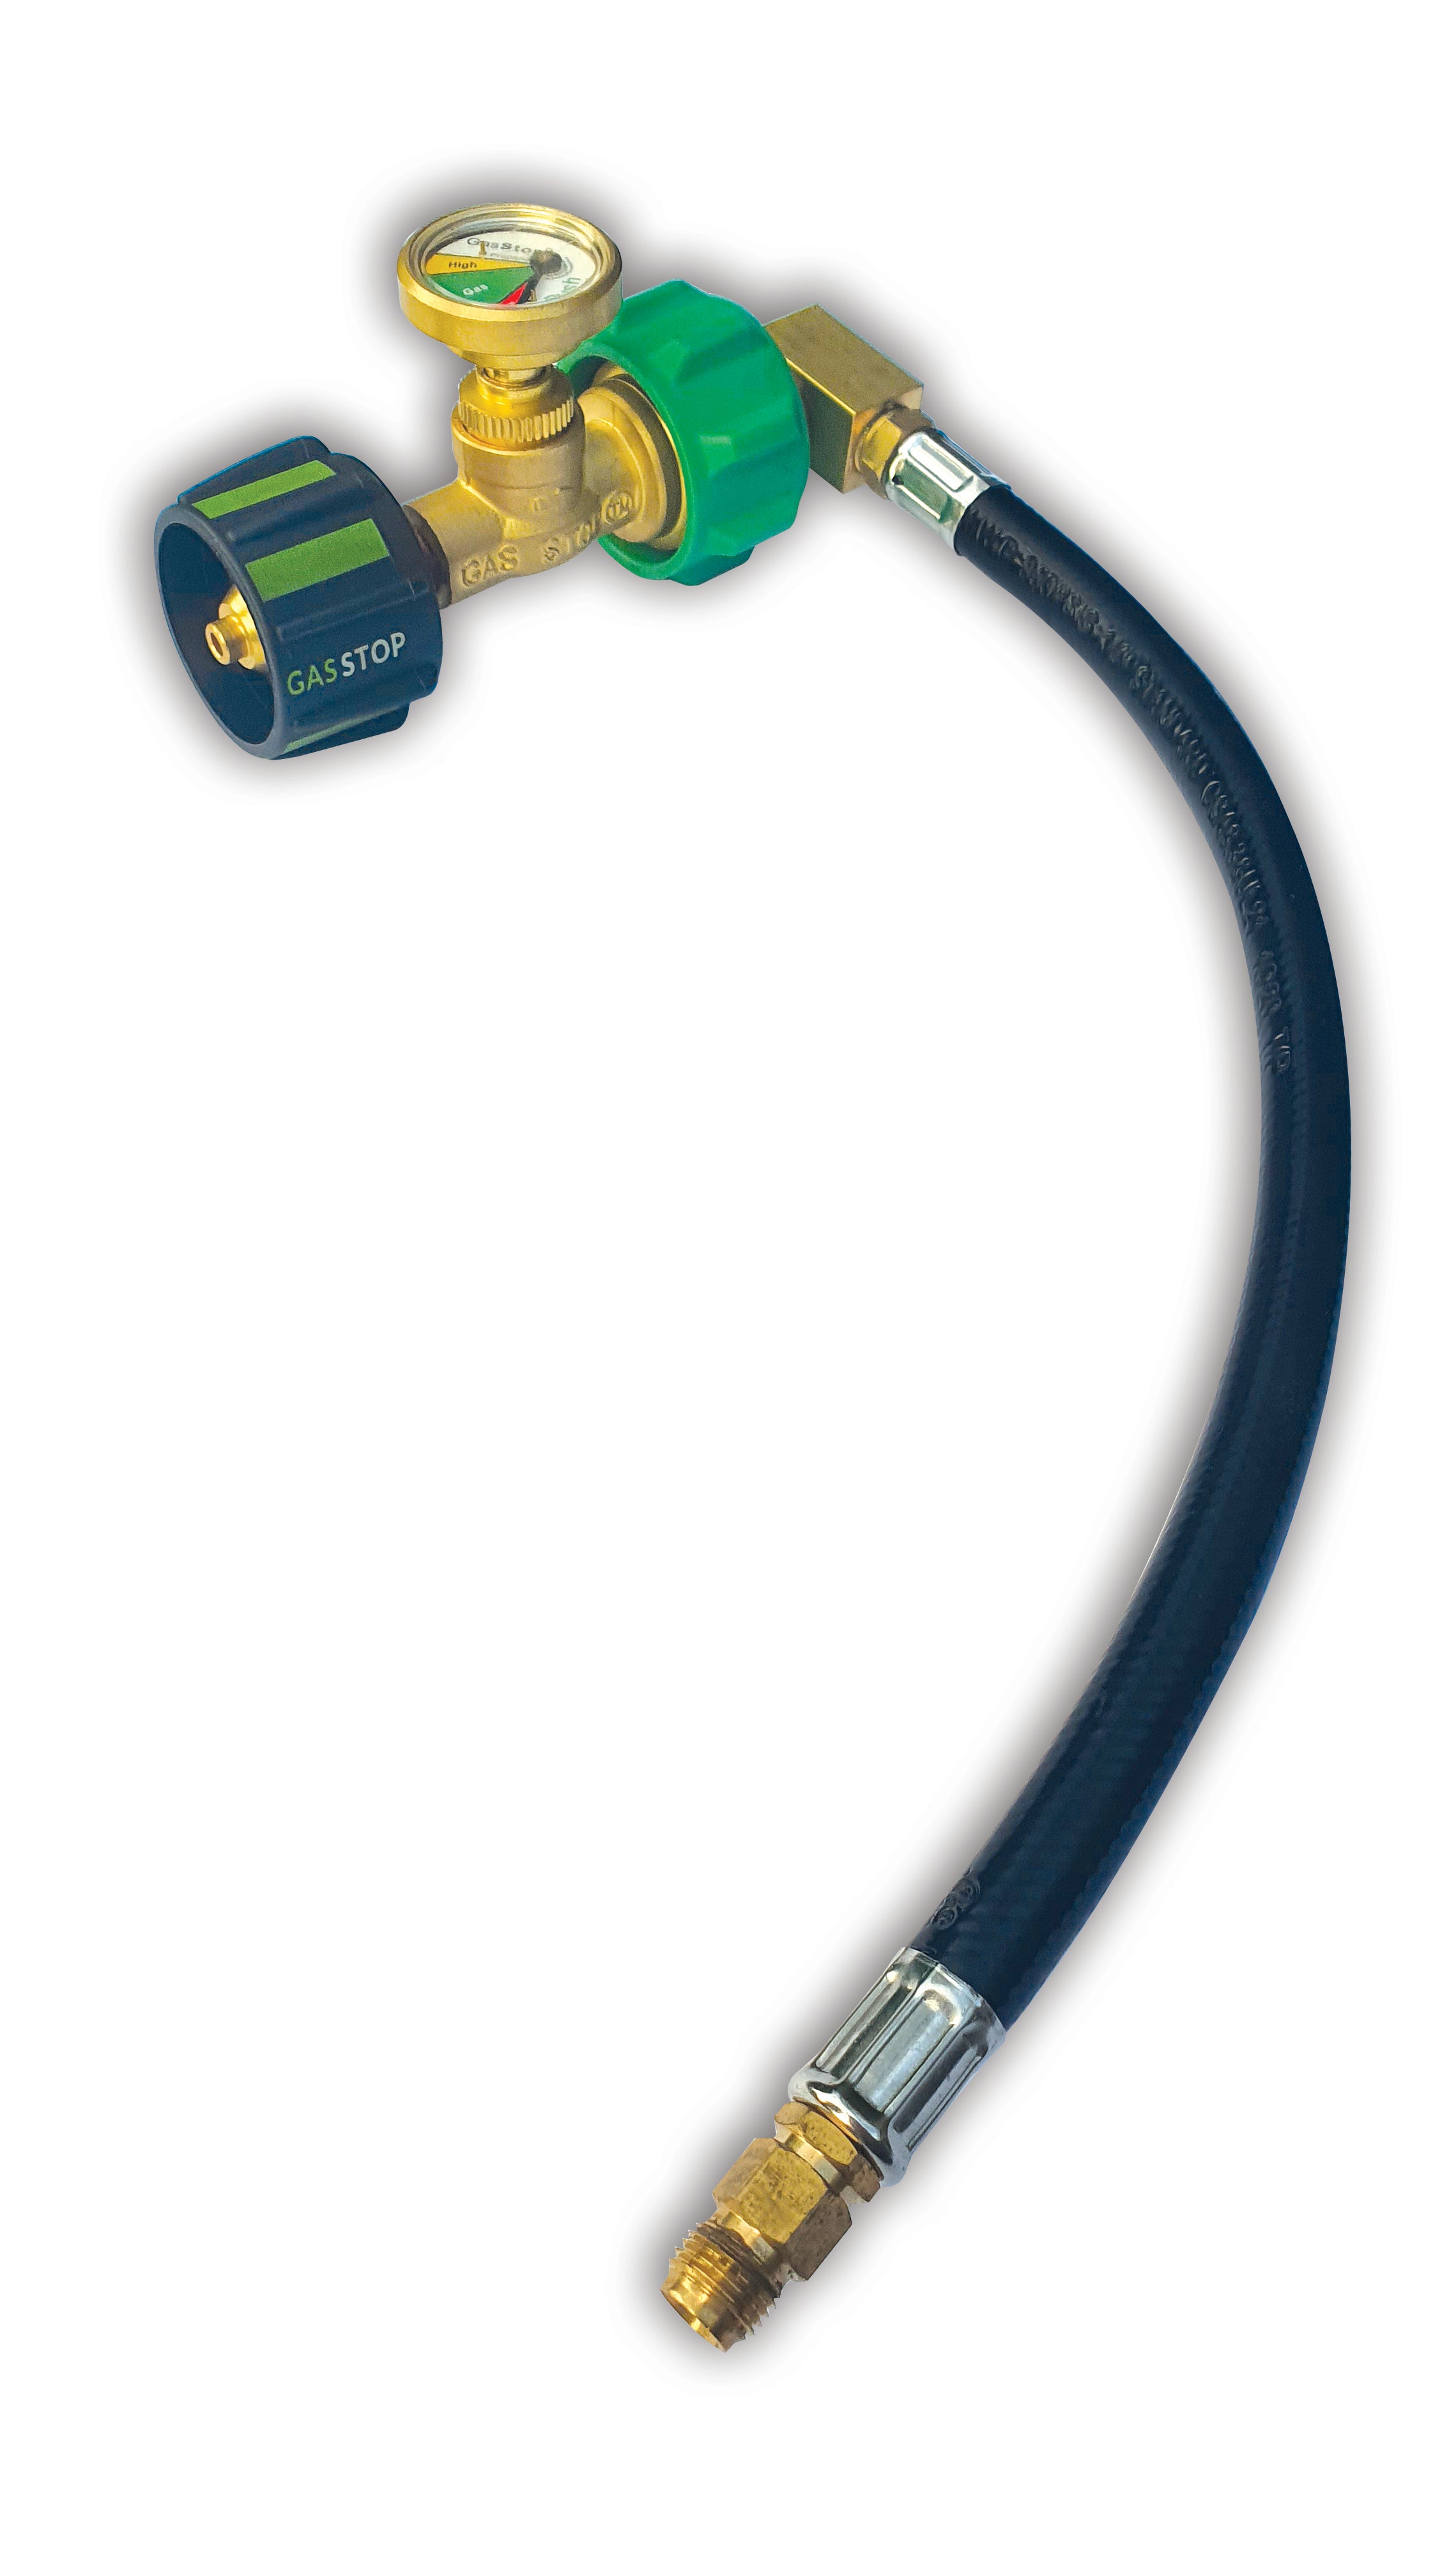 GasStop GG90IF-18 Pigtail Hose (18")